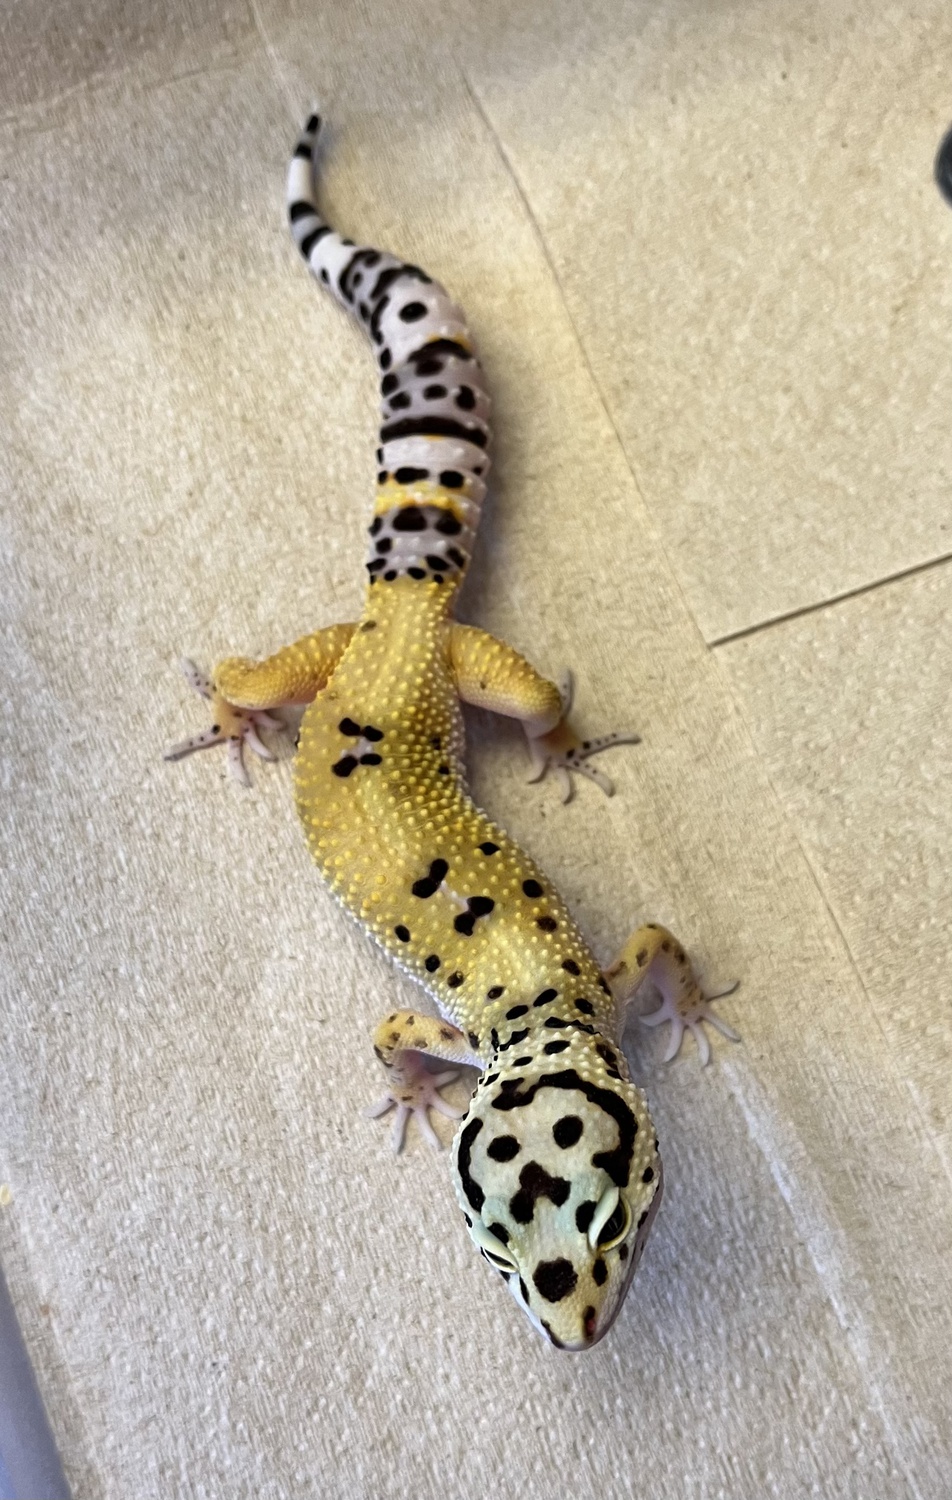 Tsf High Yellow Bandit Leopard Gecko by Hobby Herps